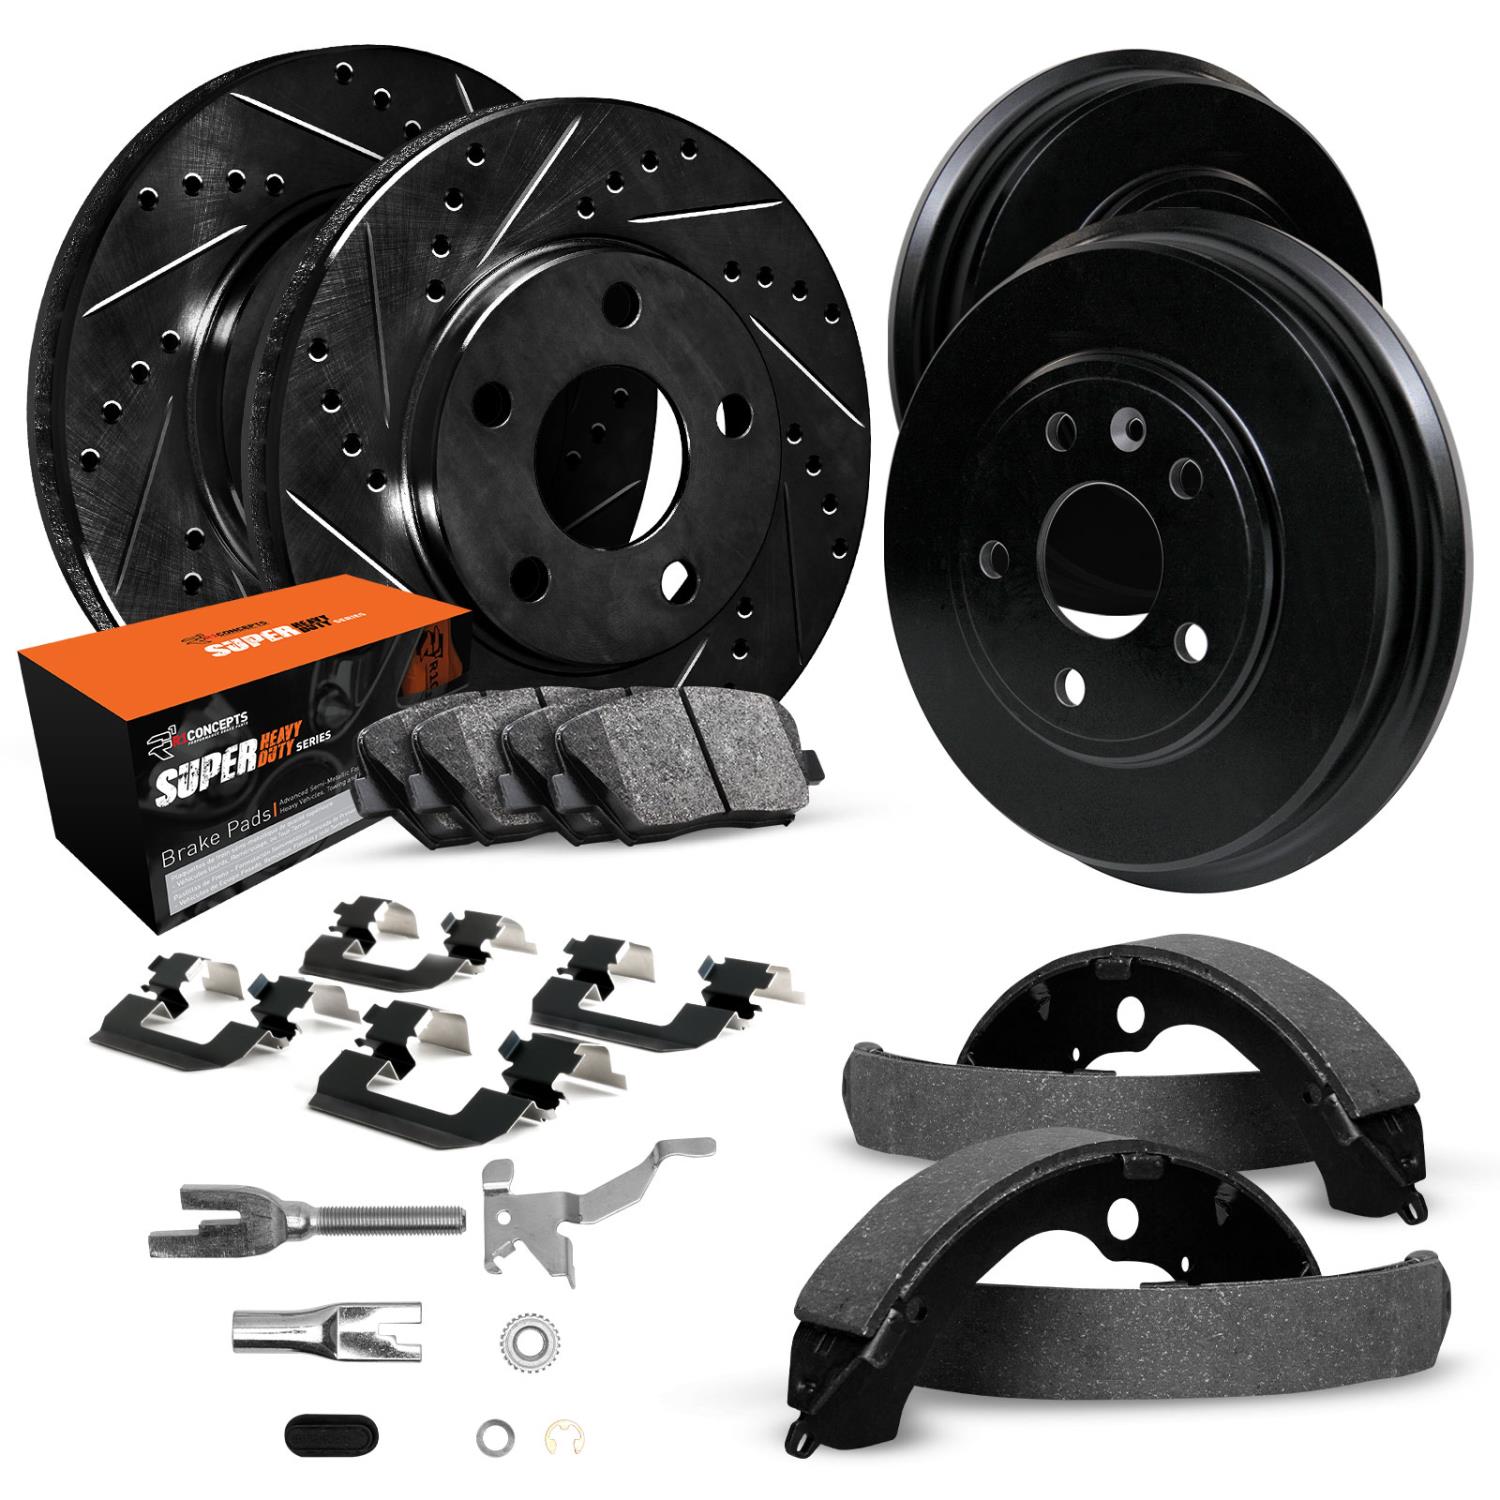 E-Line Drilled/Slotted Black Rotor & Drum Set w/Super-Duty Pads, Shoes, Hardware/Adjusters, 1975-1976 Ford/Lincoln/Mercury/Mazda